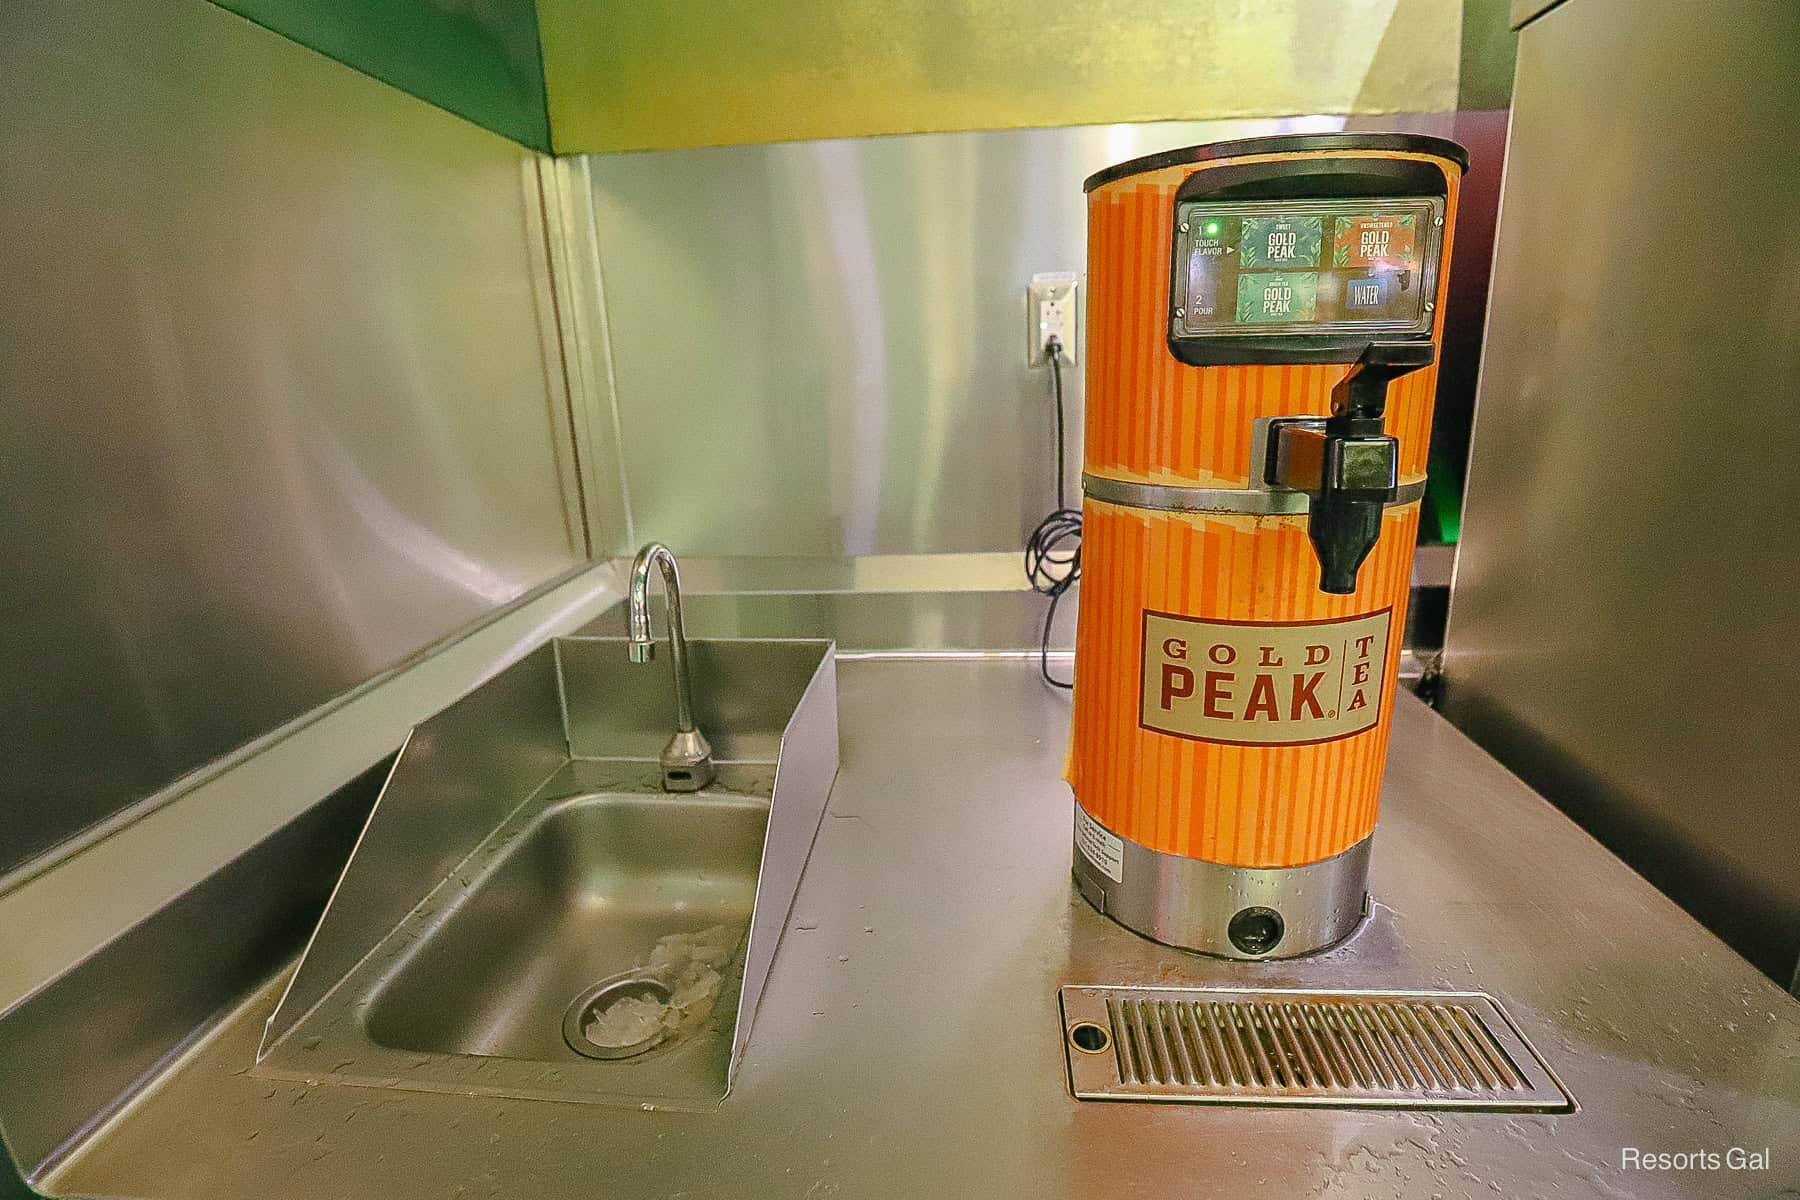 Gold Peak Tea machine at Art of Animation with a sink nearby for rinsing refillable mugs 